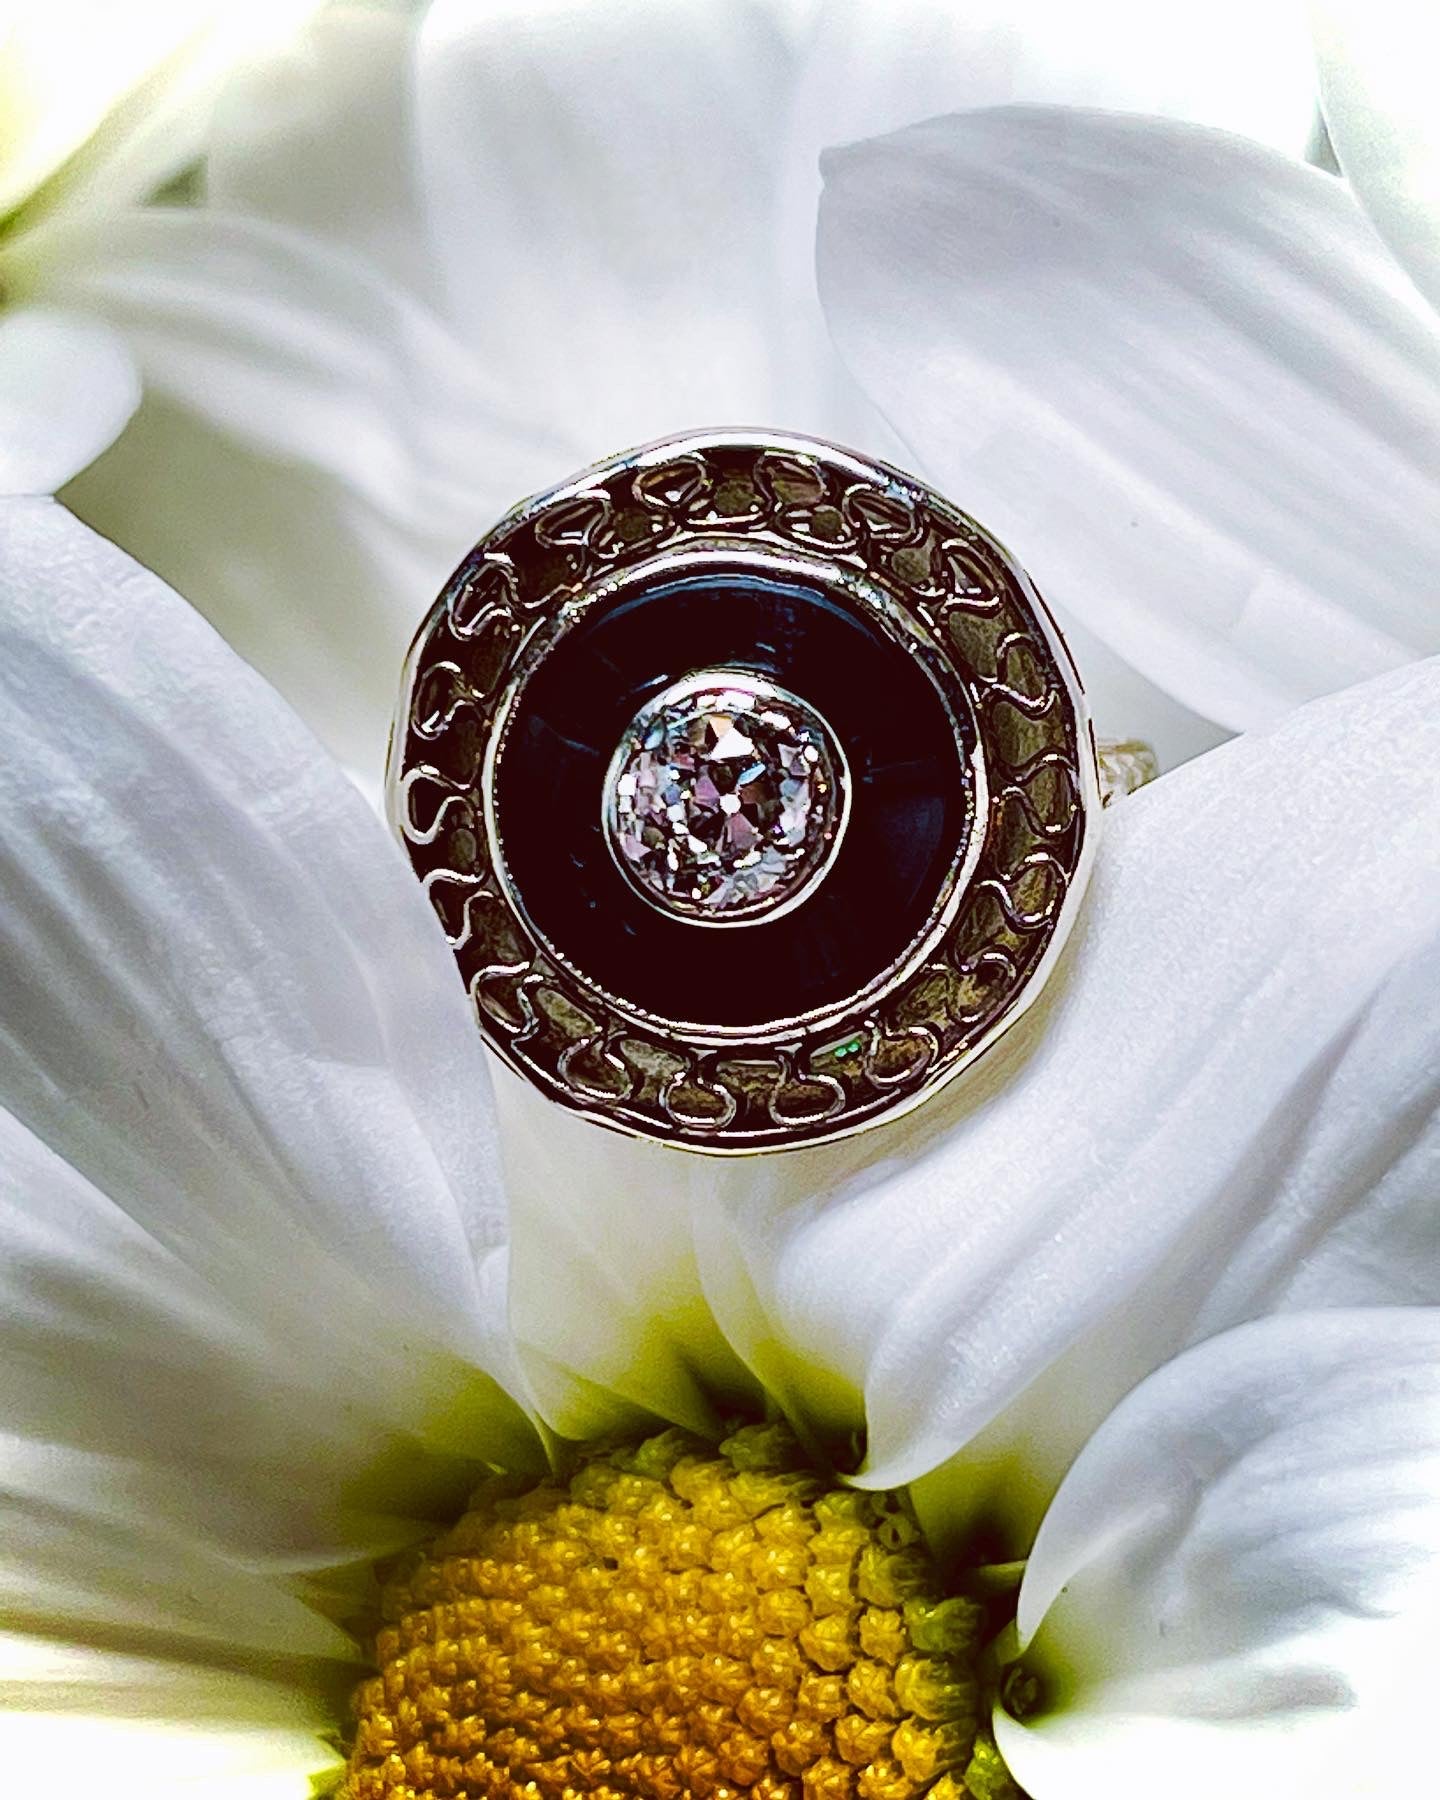 Antique Onyx and Old Mine Cut Diamond Target Ring